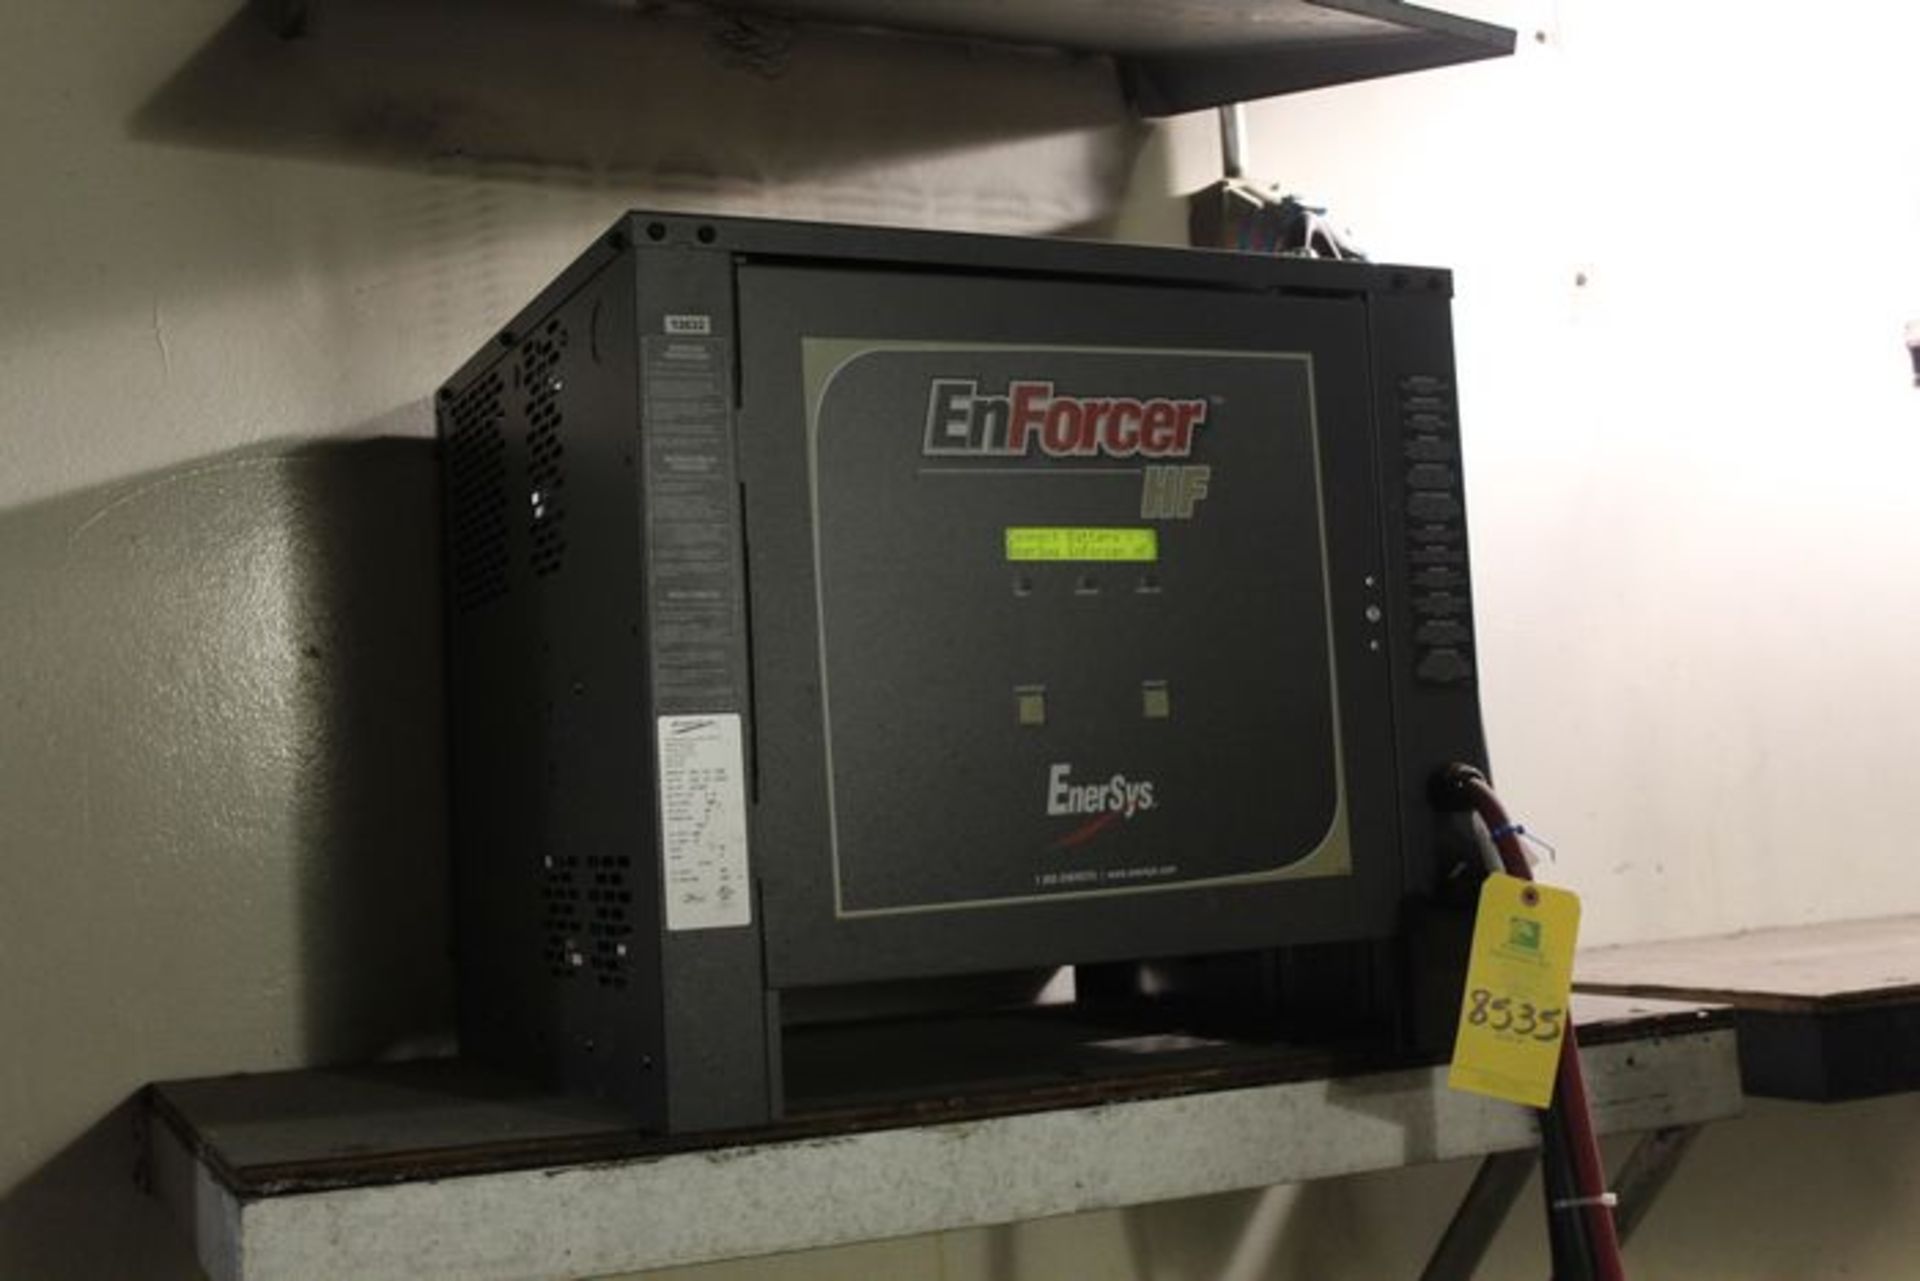 EnerSys, 48 Volt, 240 Amp, EnForcer HF, M# EH3-24-1500, S/N IL73401 | (Warehouse B Charging)